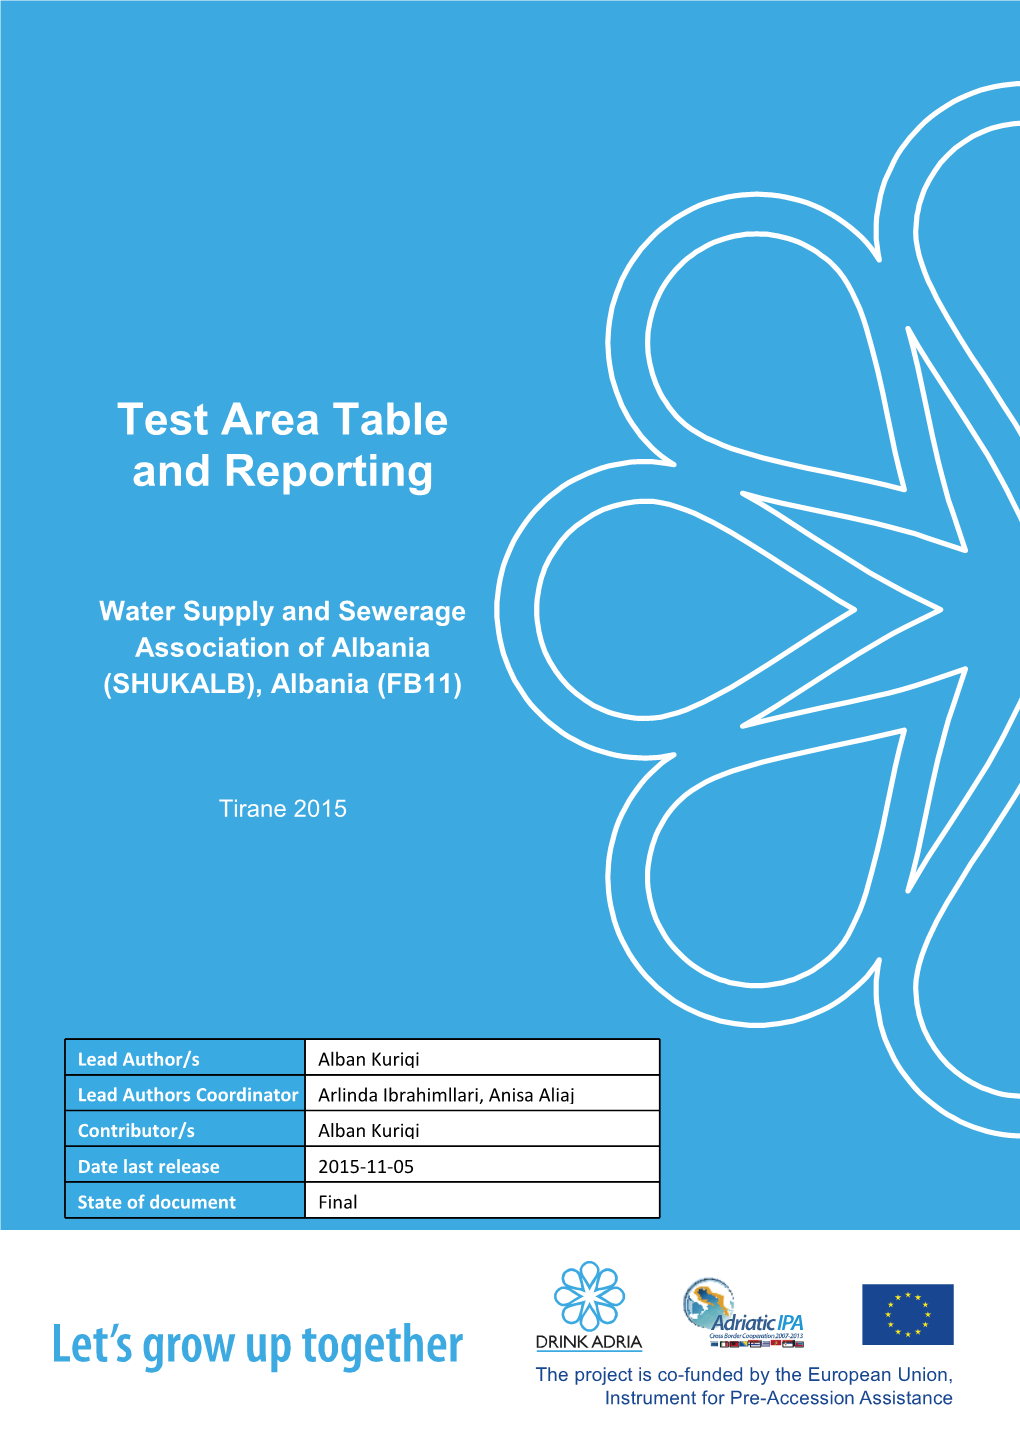 Test Area Table and Reporting